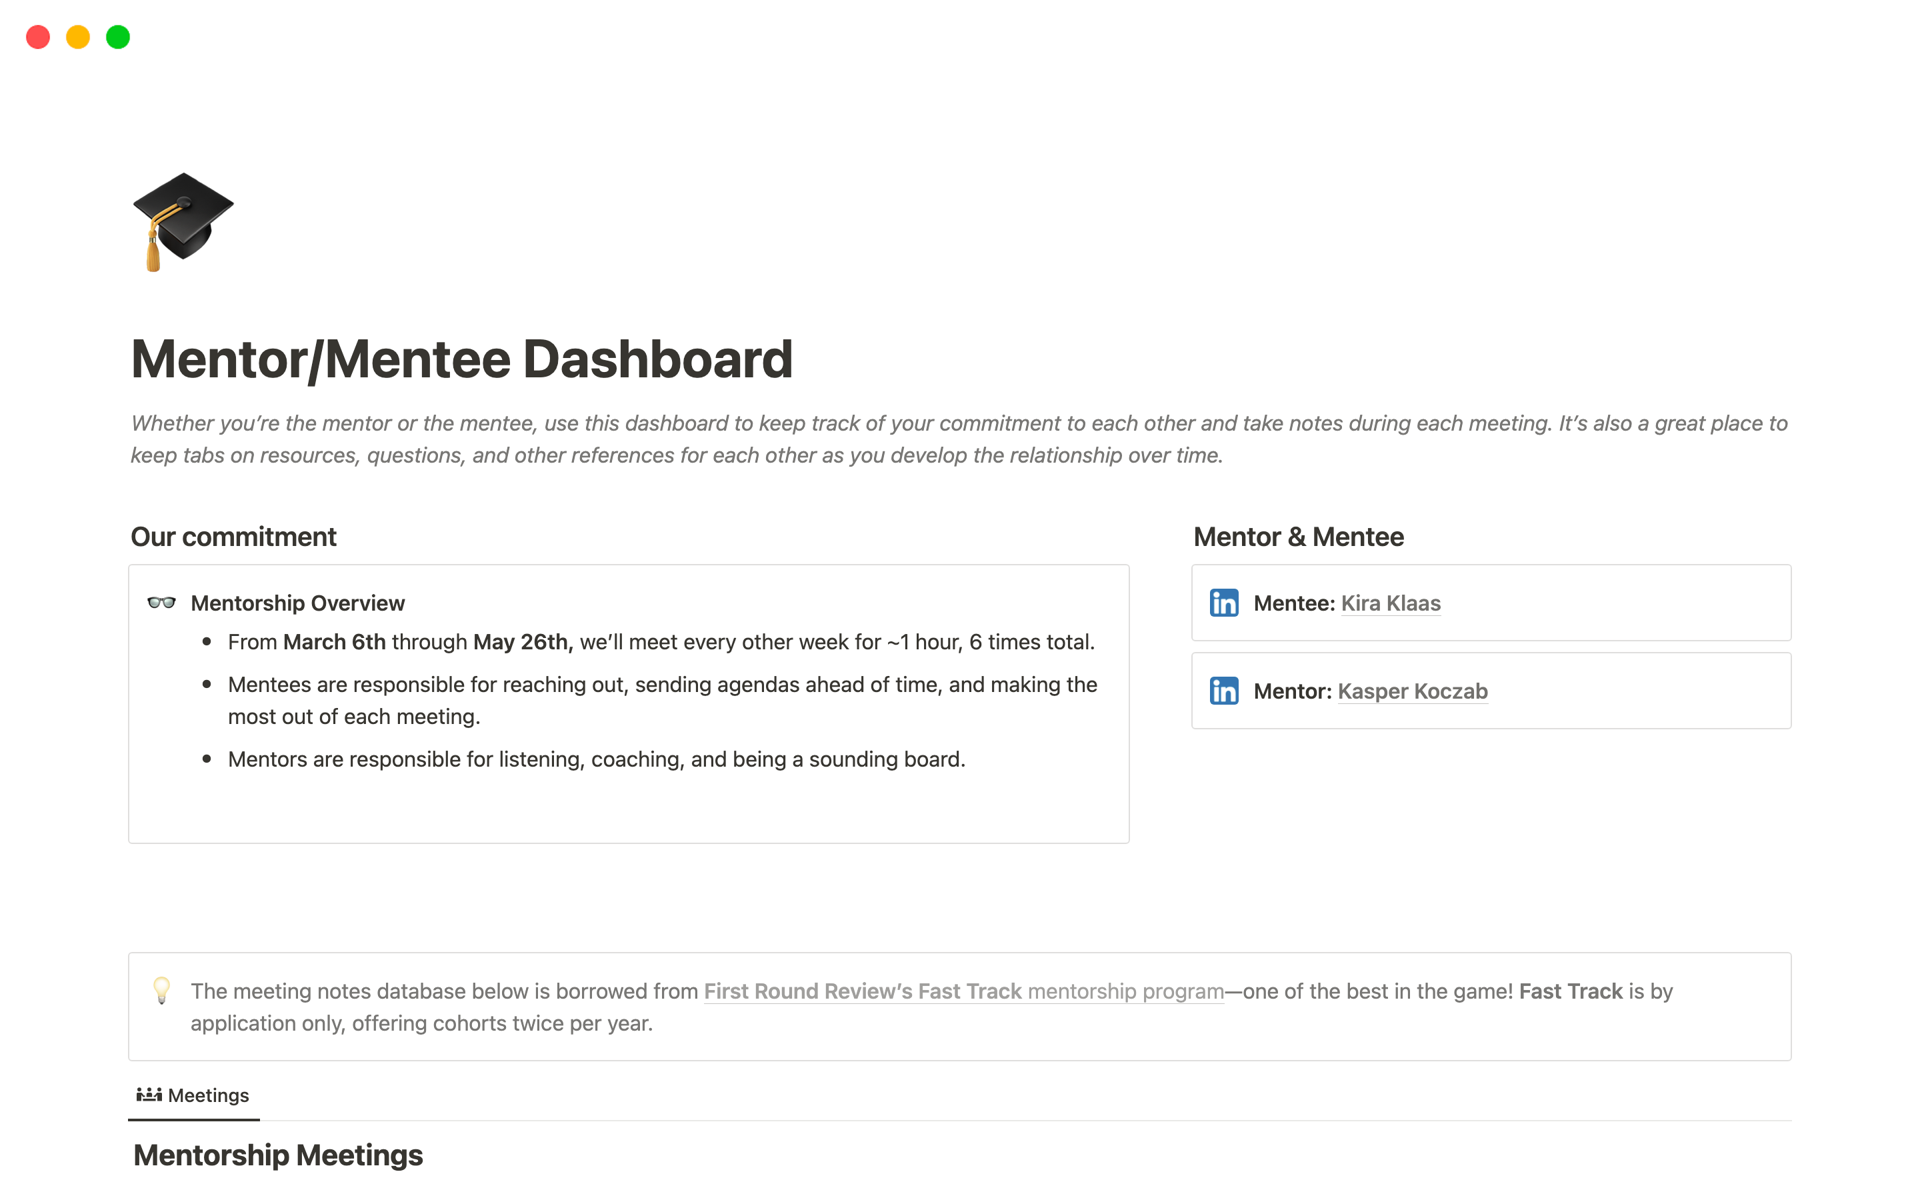 The ultimate dashboard for mentor/mentee relationships to take notes, ask questions, and make reflections—including resources for both mentors and mentees.